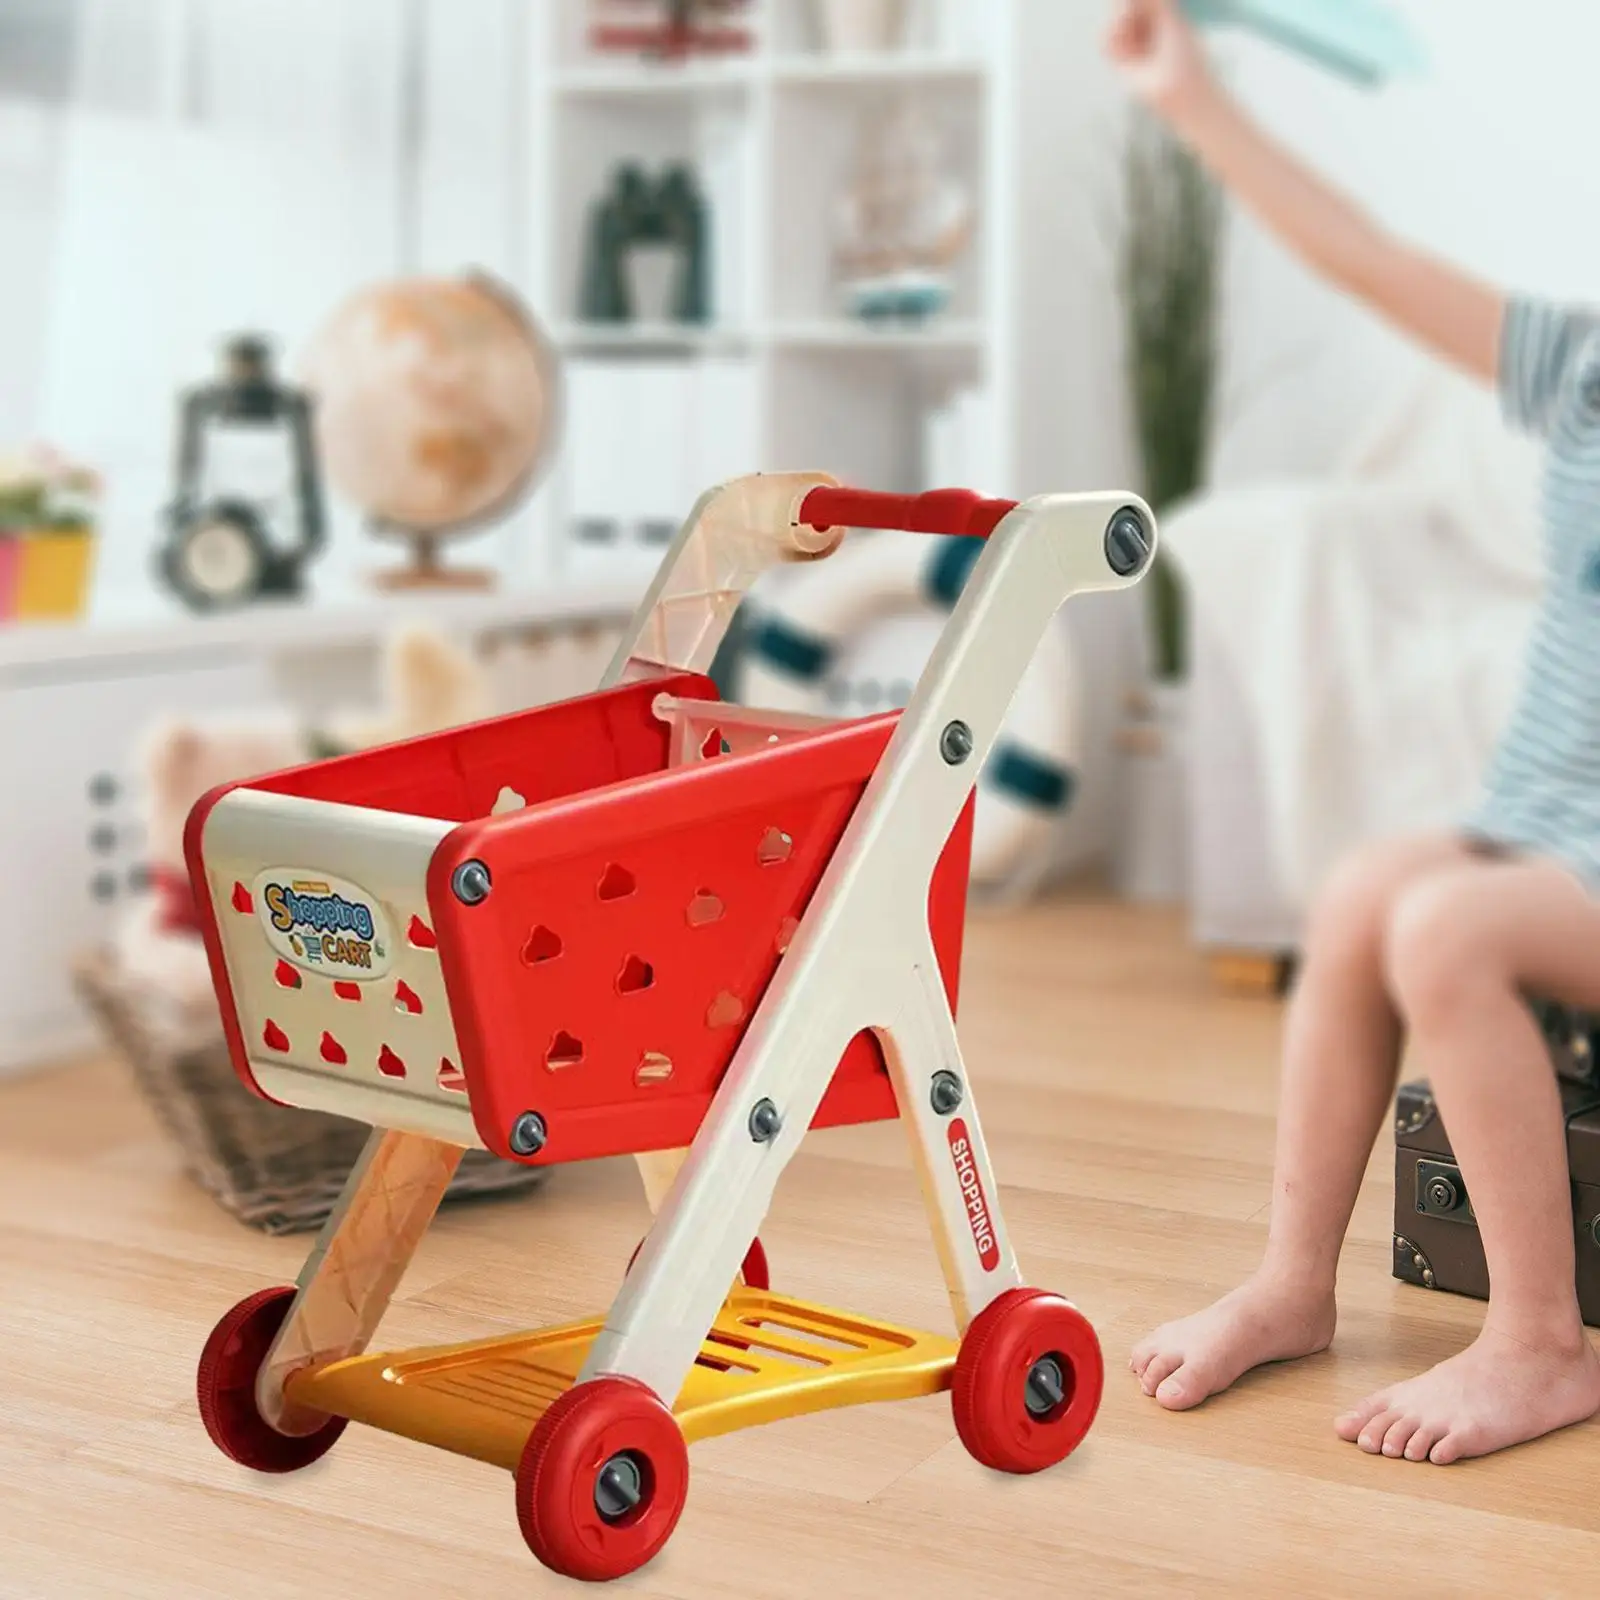 Mini Shopping Cart Toy Deluxe Supermarket Handcart Toy Grocery Carts Toy for Baby Ages 3 and up Preschool Creative Toys